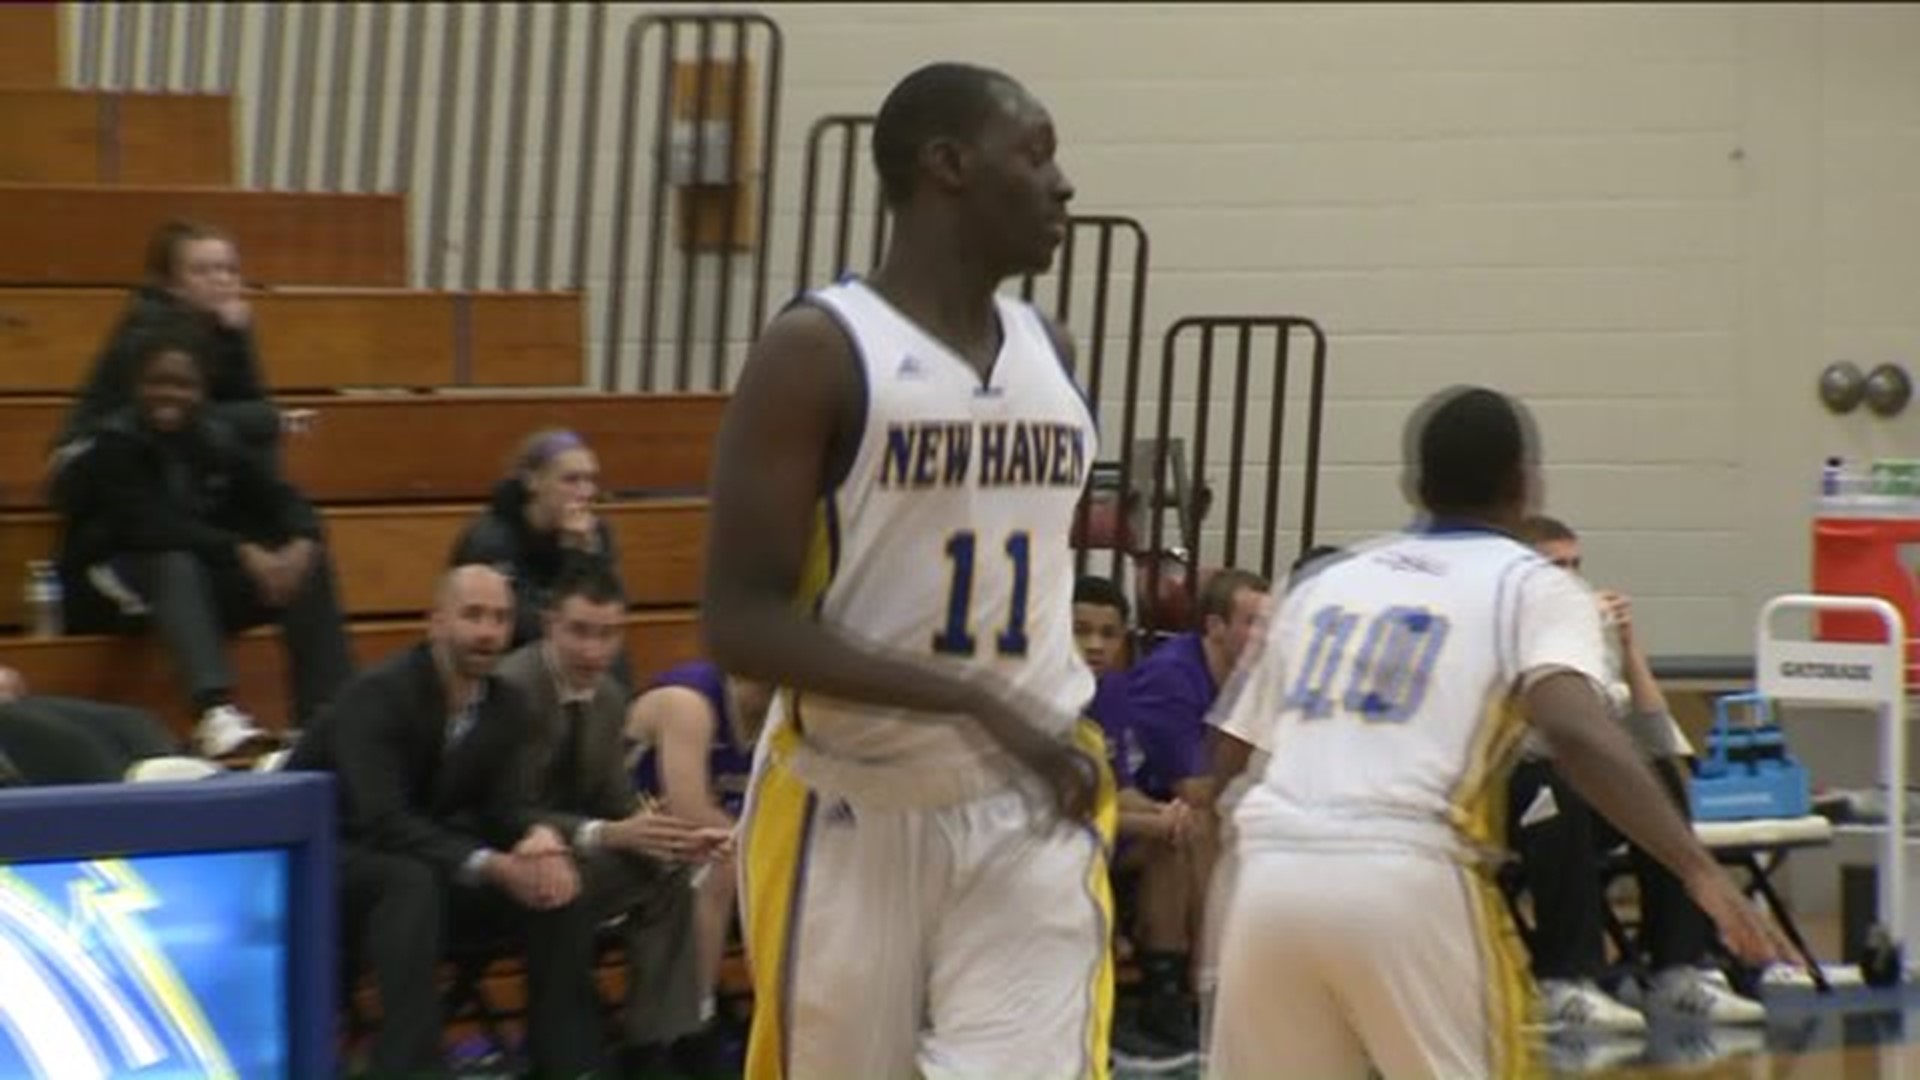 University of New Haven freshman Roy Kane Jr. becoming a force